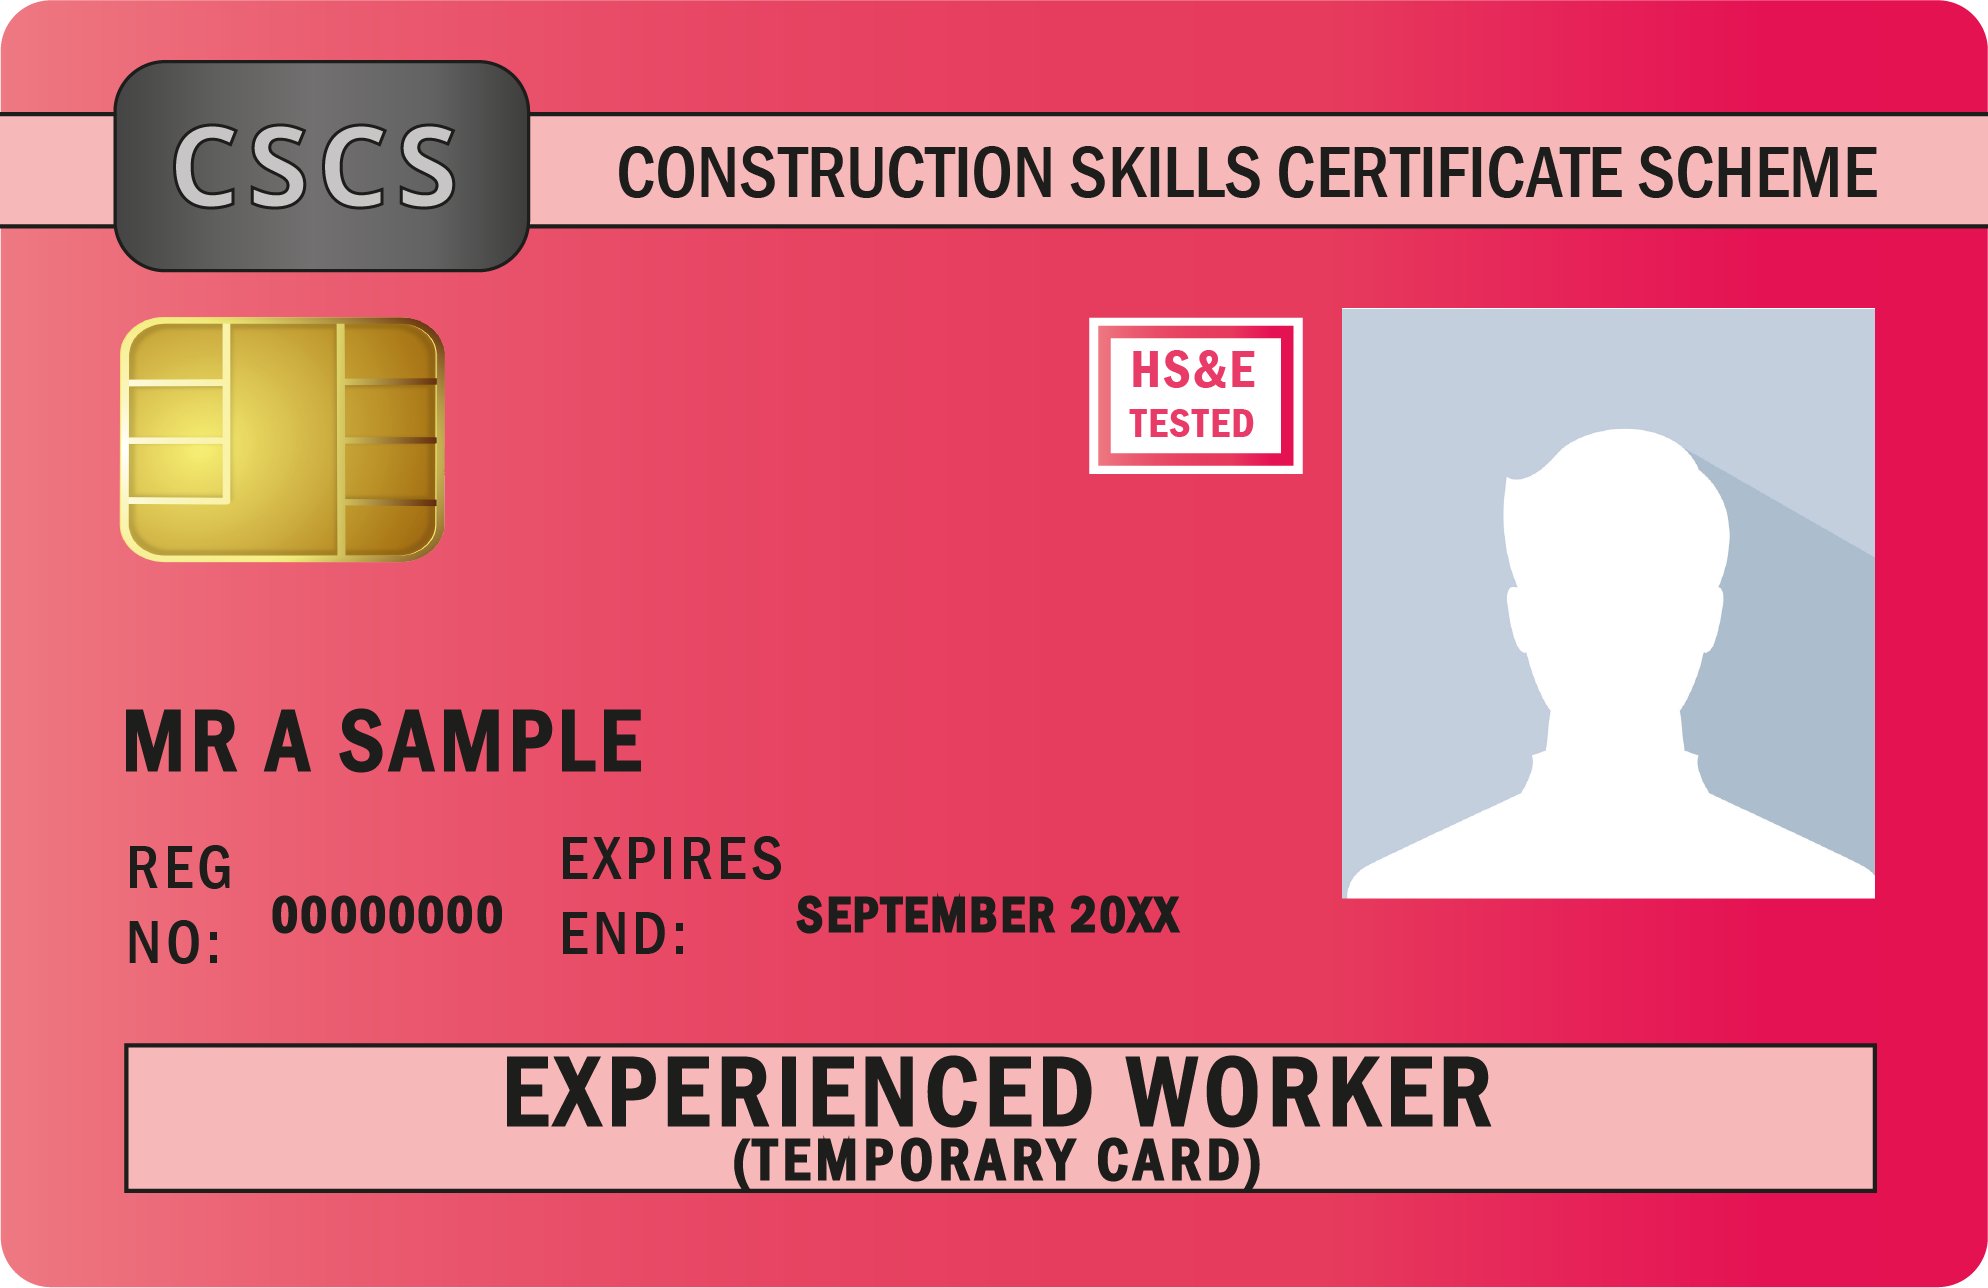 Image shows Experienced Worker Red Card